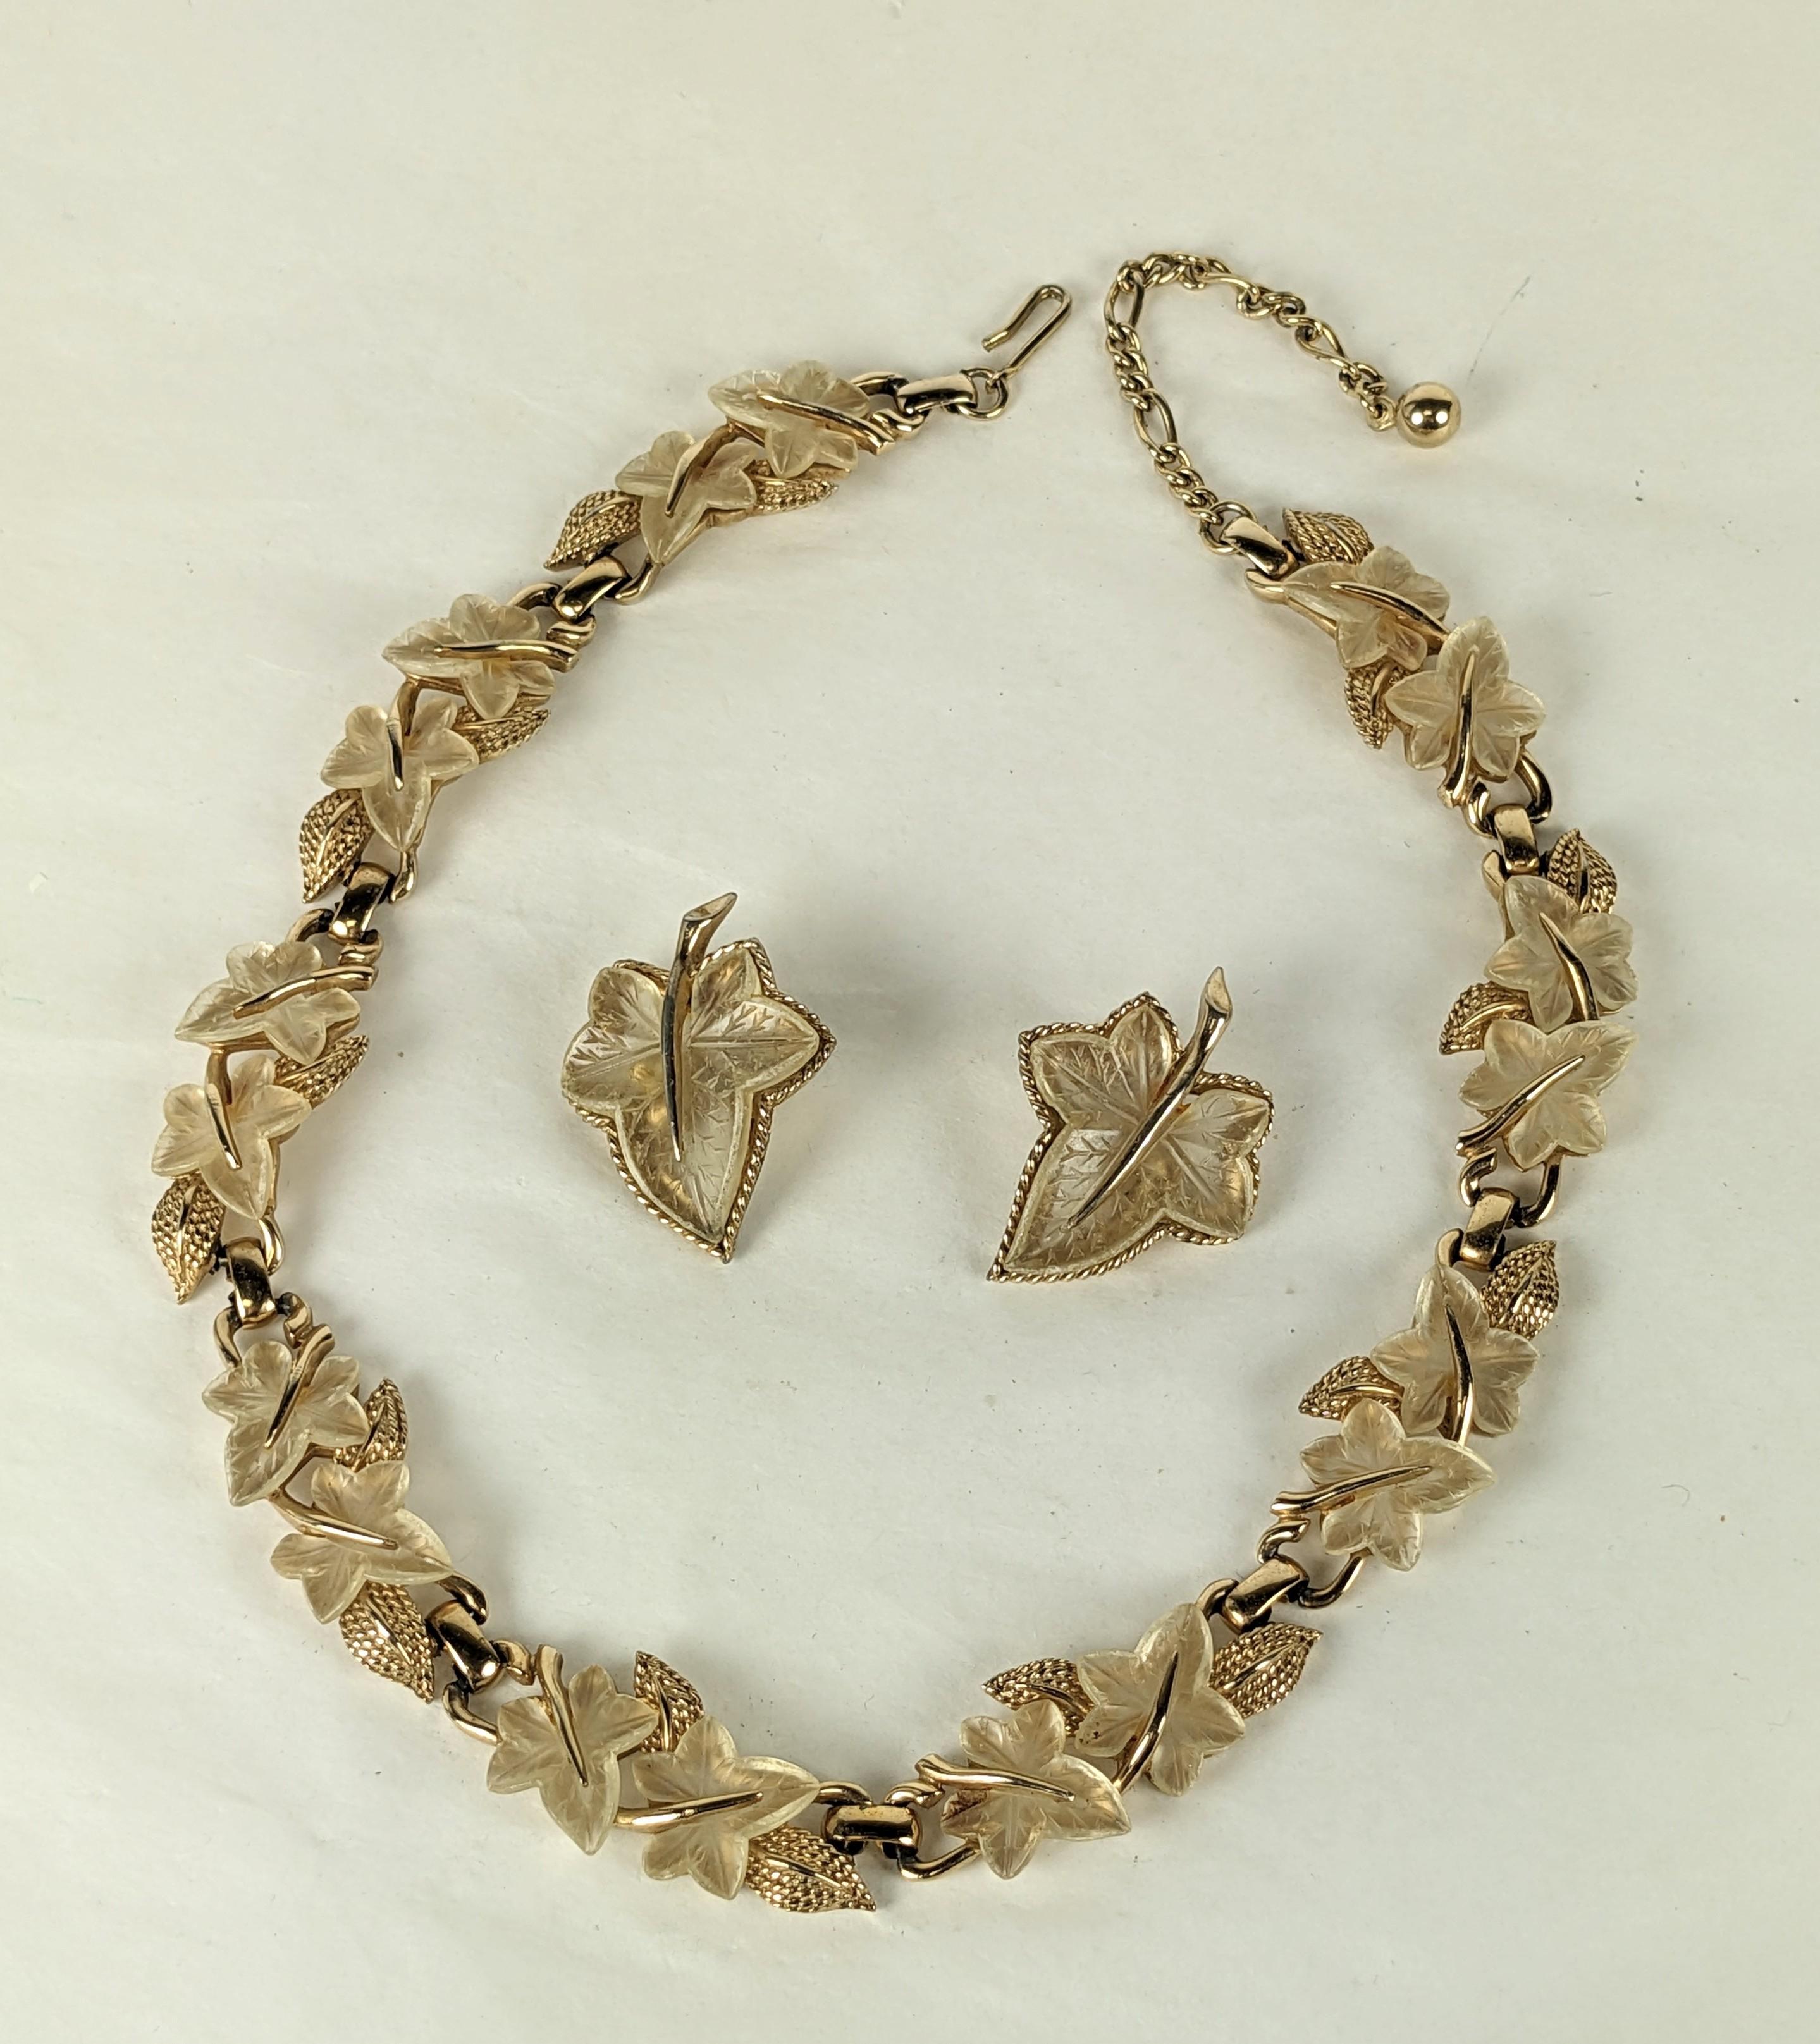 Marcel Boucher Frosted Leaf Necklace and Earring Set from the 1960's. Ribbed gilt metal with frosted glass leaves set into an alternating pattern. 1960's USA. 
Necklace 14